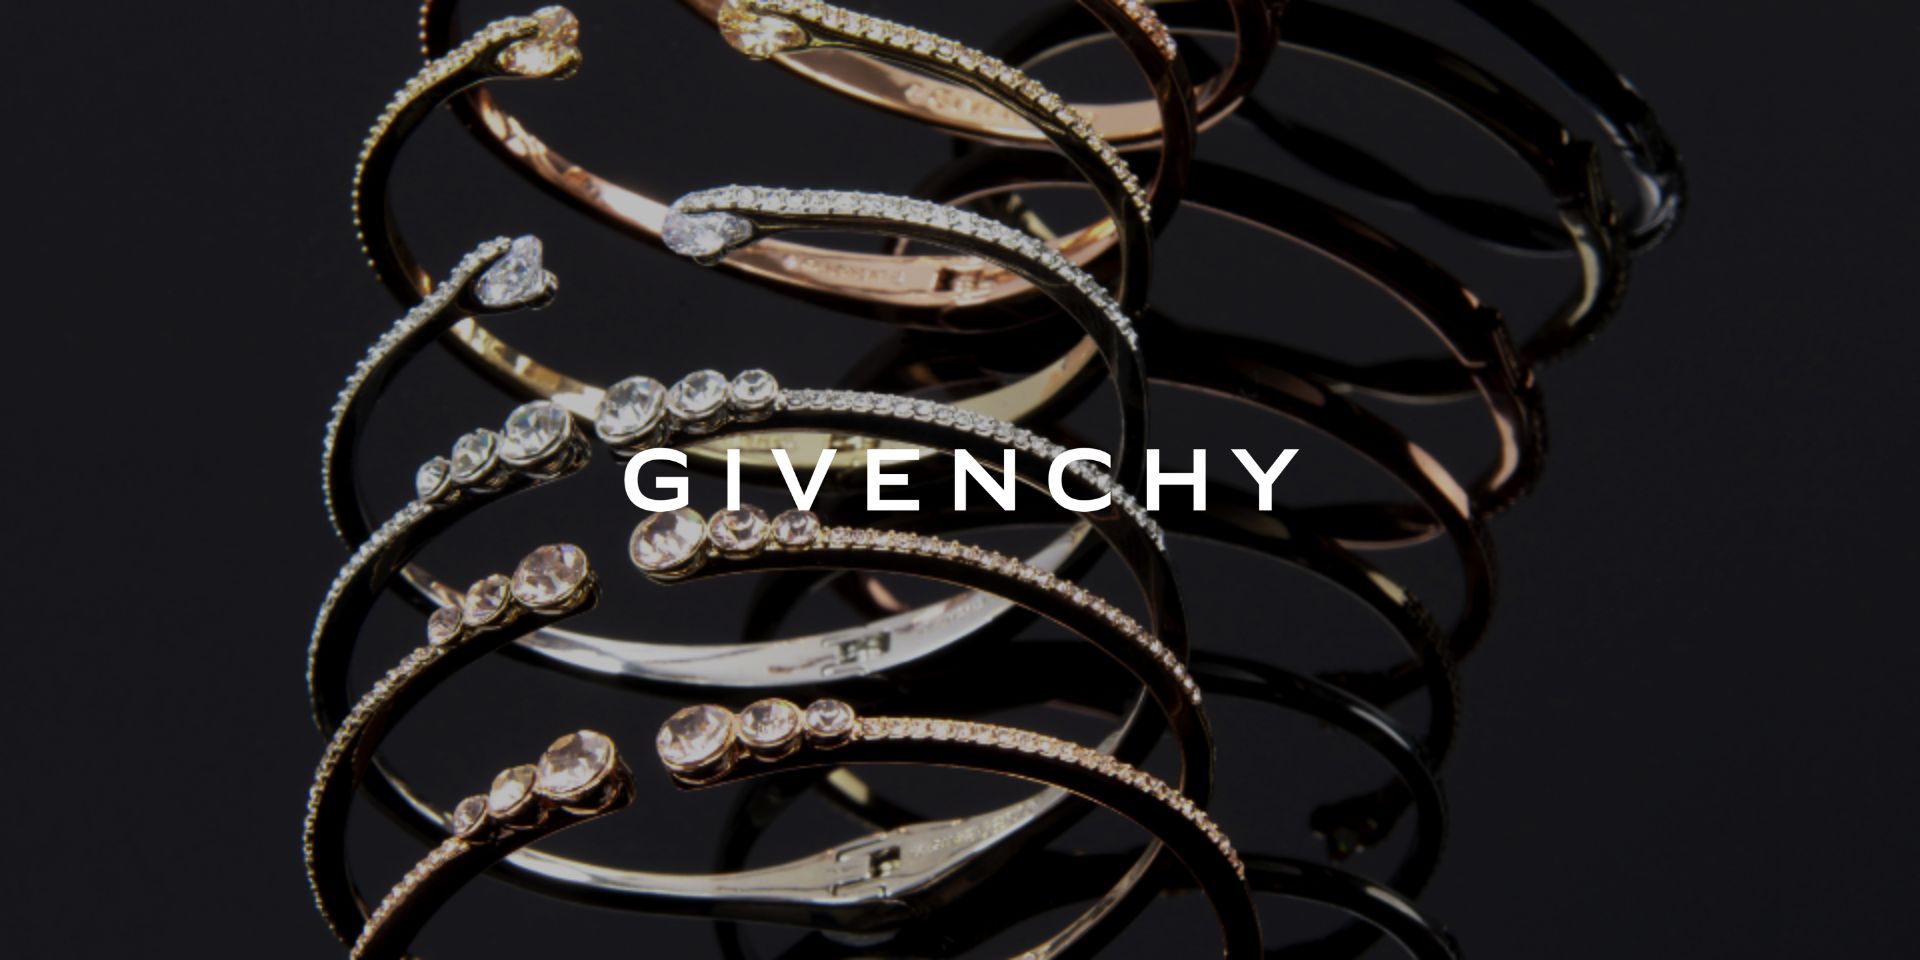 Brand logo of Givenchy